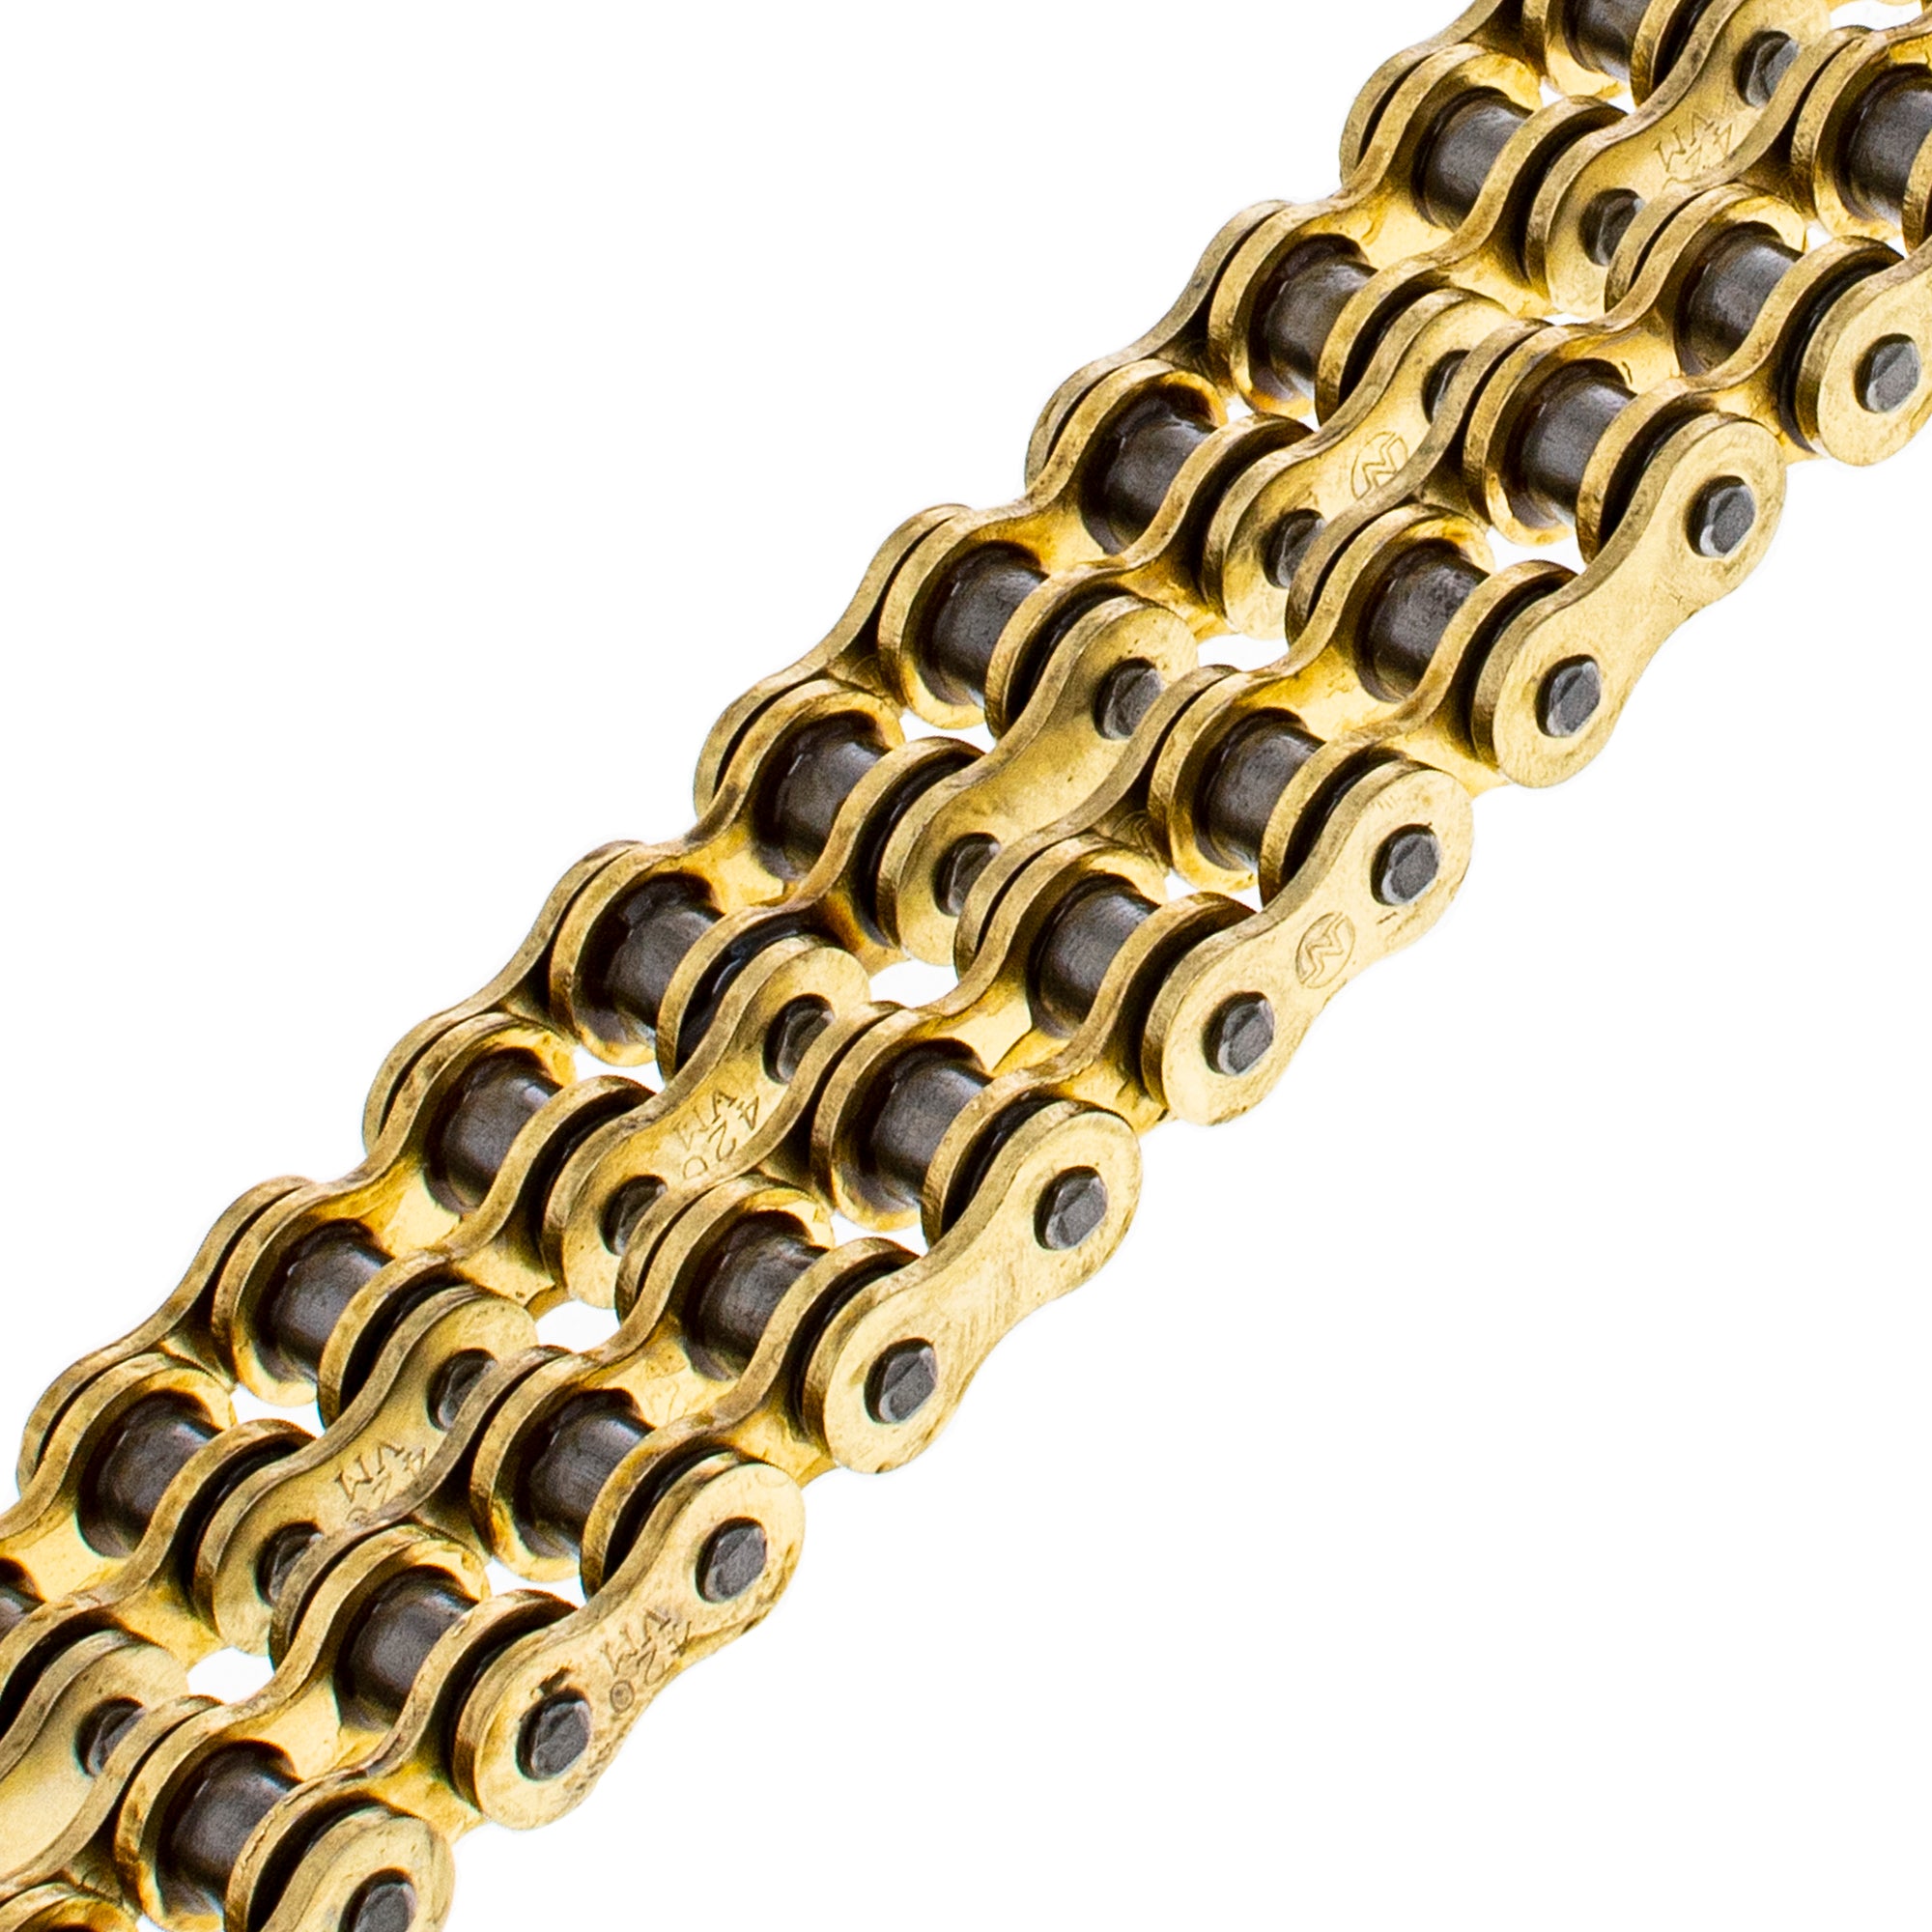 Gold X-Ring Chain 114 w/ Master Link for zOTHER Yamaha Honda YZ65 Elsinore Dream CR80R NICHE 519-CDC2580H